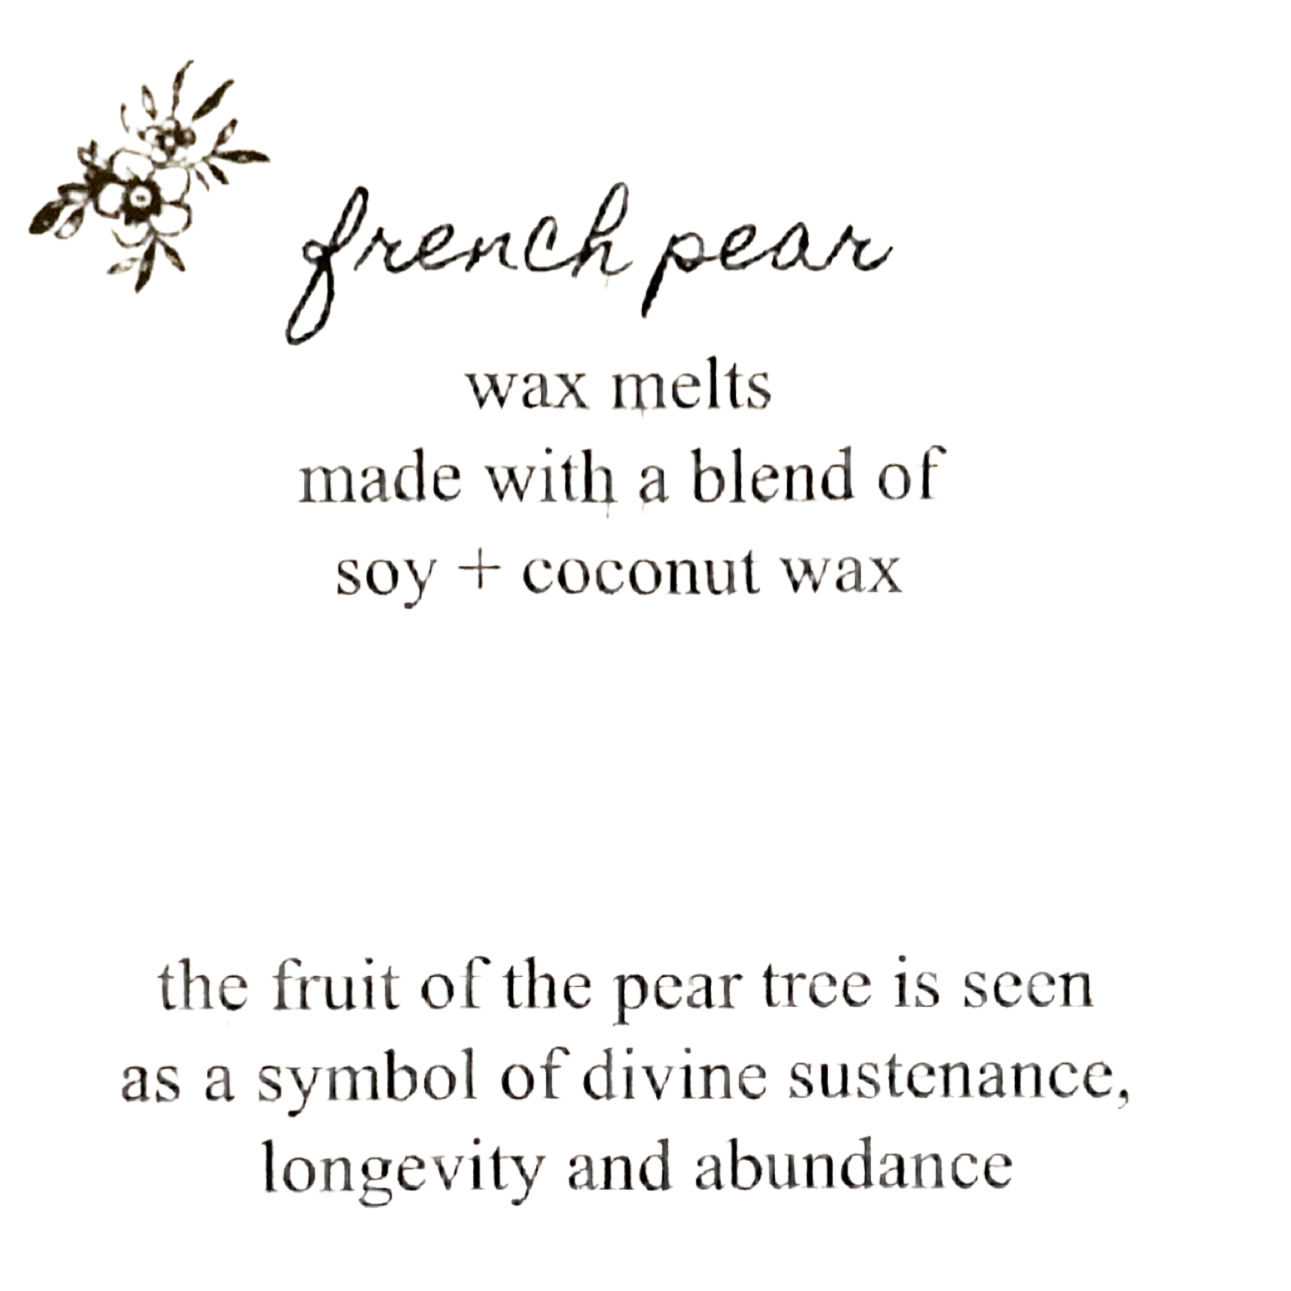 french pear